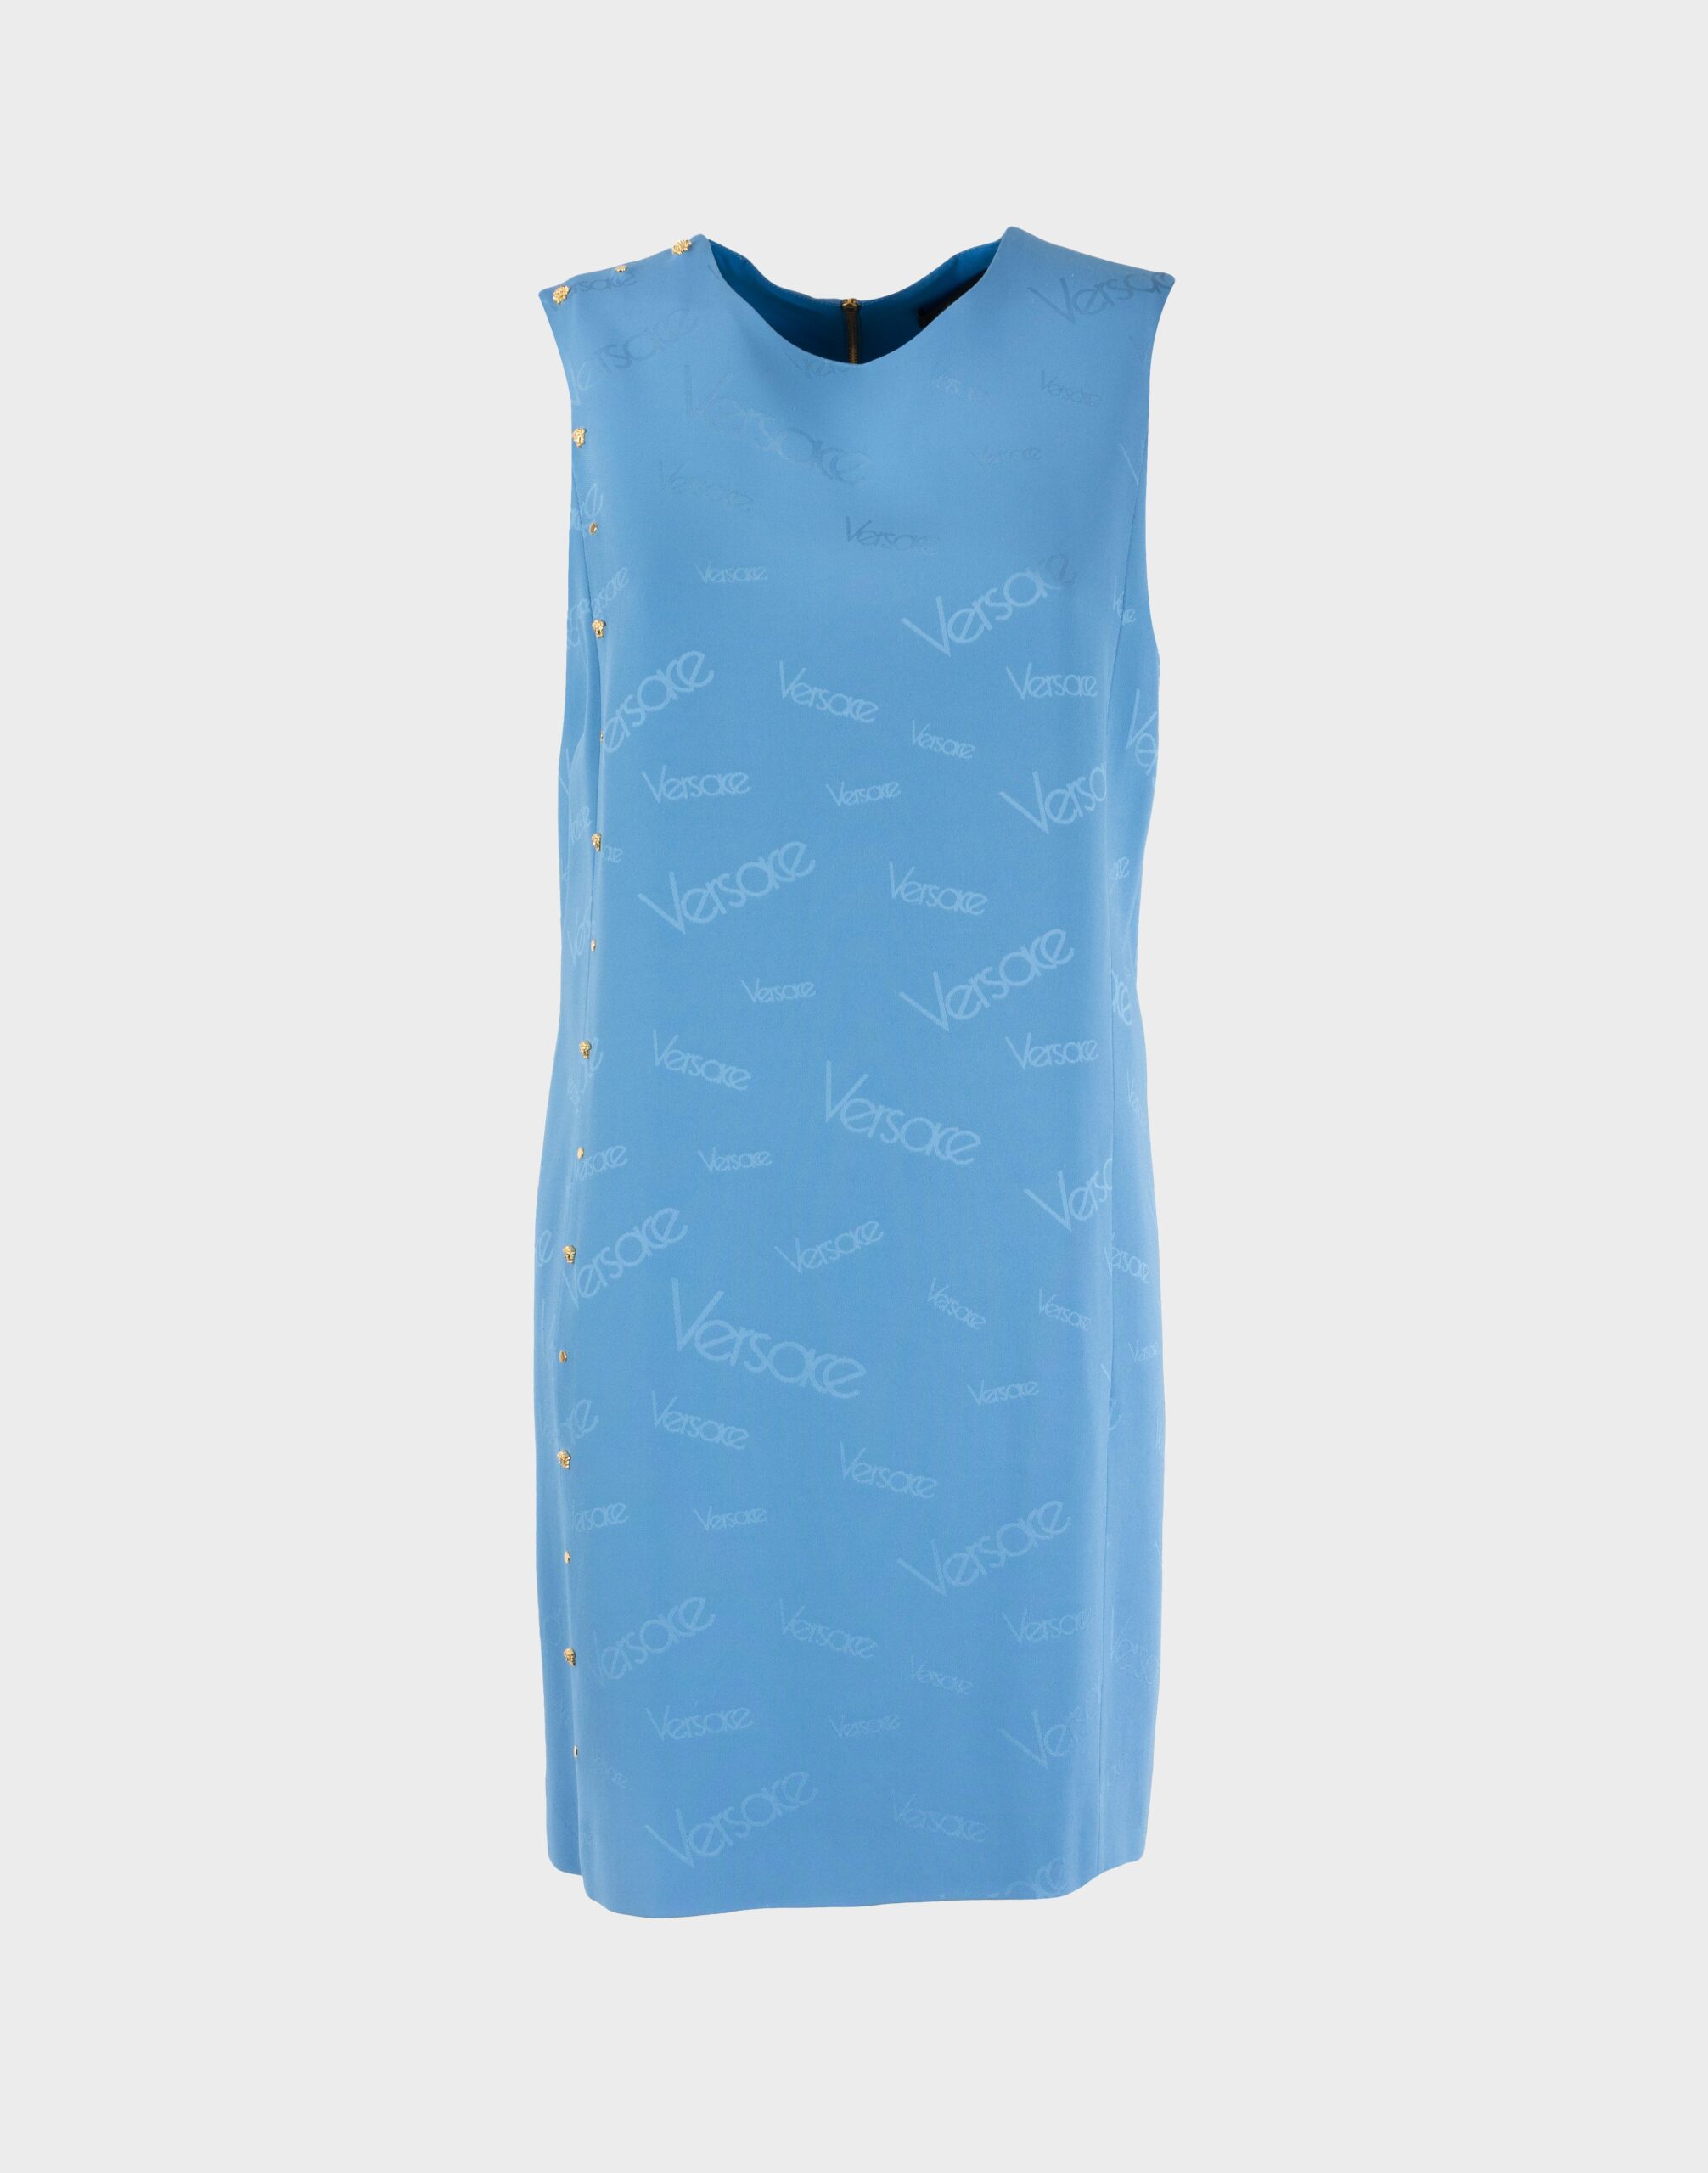 Women's sleeveless sky blue dress with round neckline, gold studs applied on the shoulder and side, logo pattern